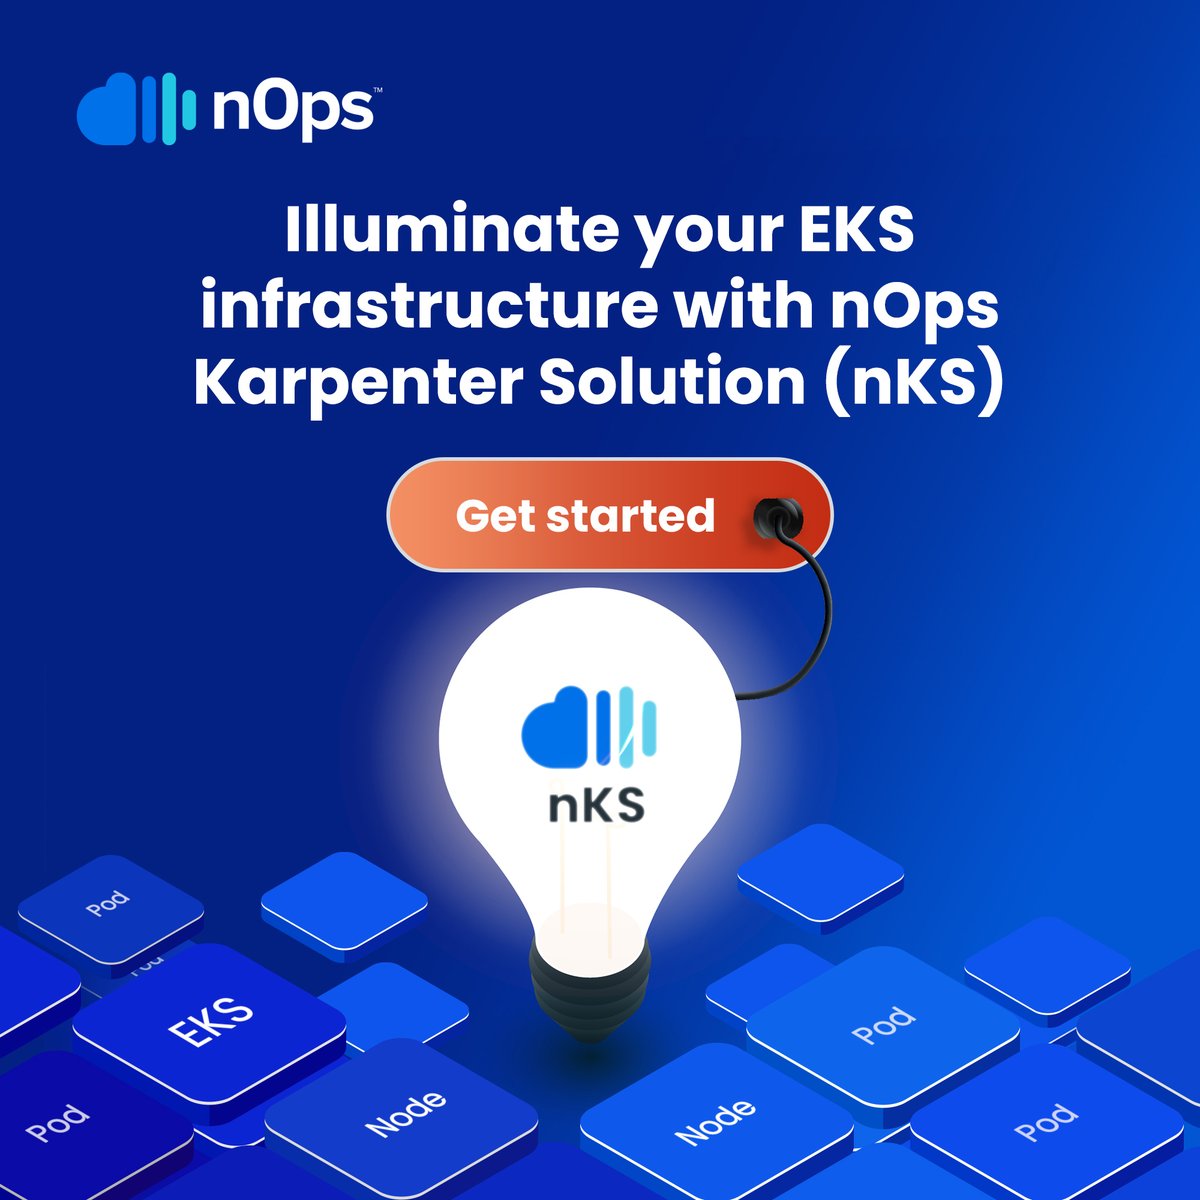 Empower your EKS infrastructure with nOps Karpenter Solution (nKS), the game-changing solution for cost optimization.

Maximize ROI, reduce expenses, and thrive in the cloud.

🔗 Get Started: nops.io/nks/

#finops #karpenter #eks #awscloud #cloudcomputing #spot